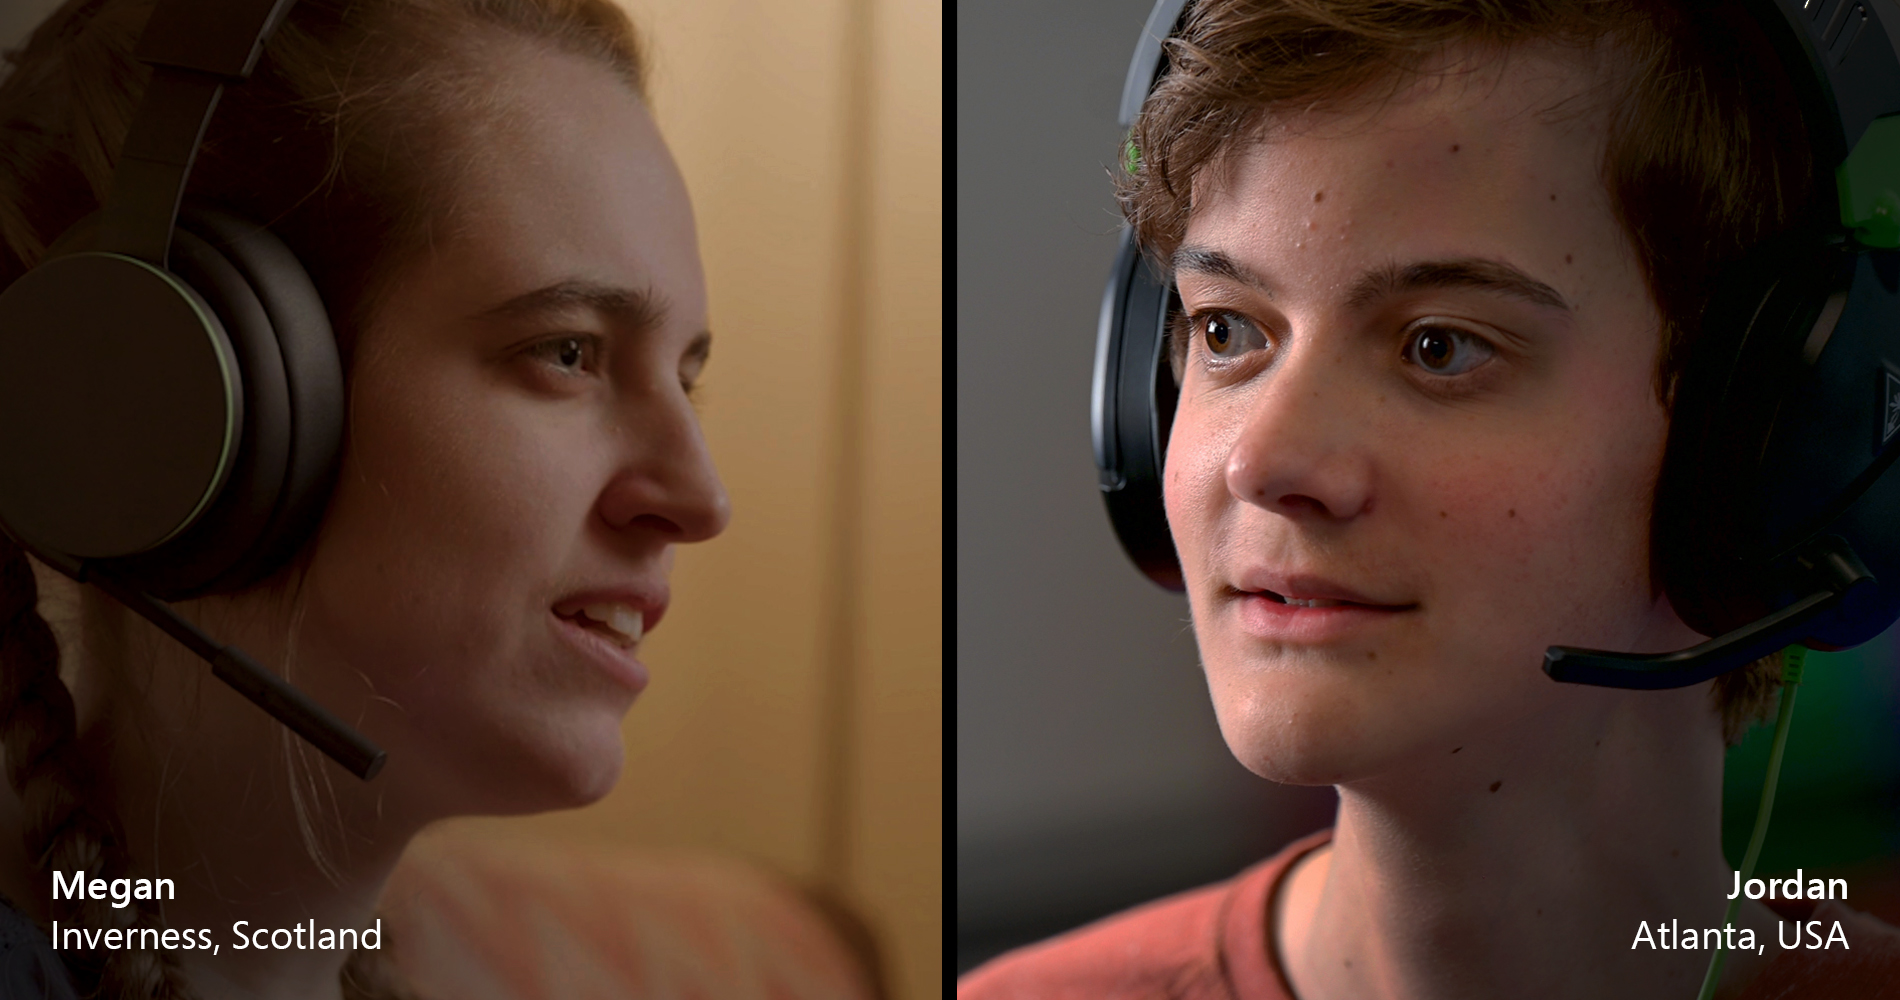 Separated by an ocean, two people connect through gaming, similar passions and a rare disease